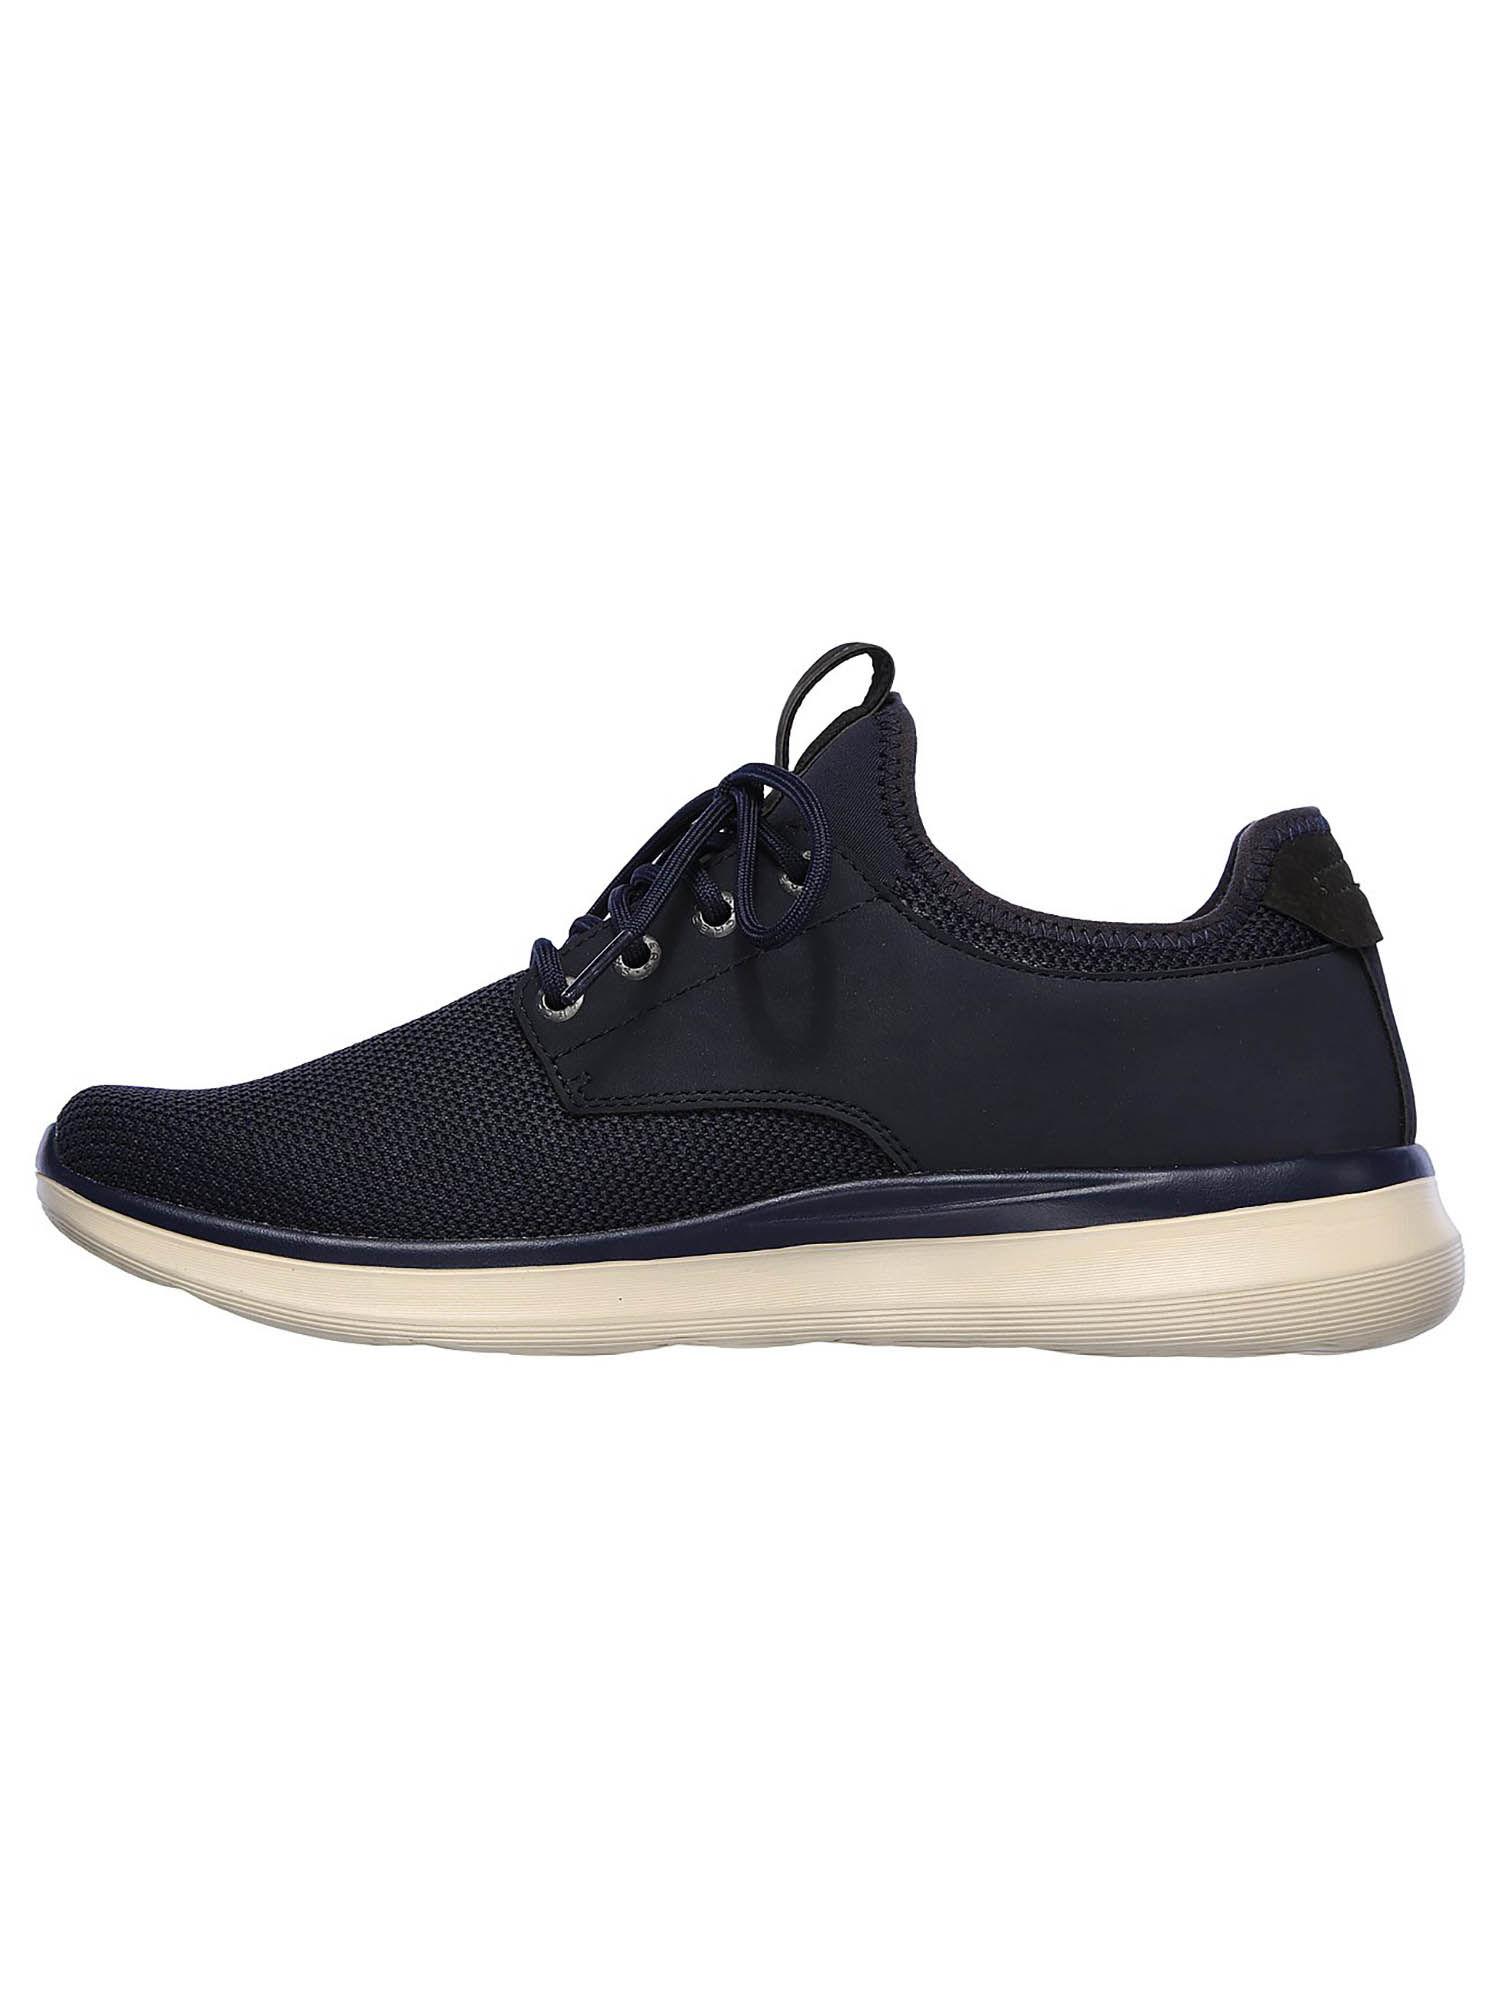 delson-2.0-weslo-navy-blue-lifestyle-shoes